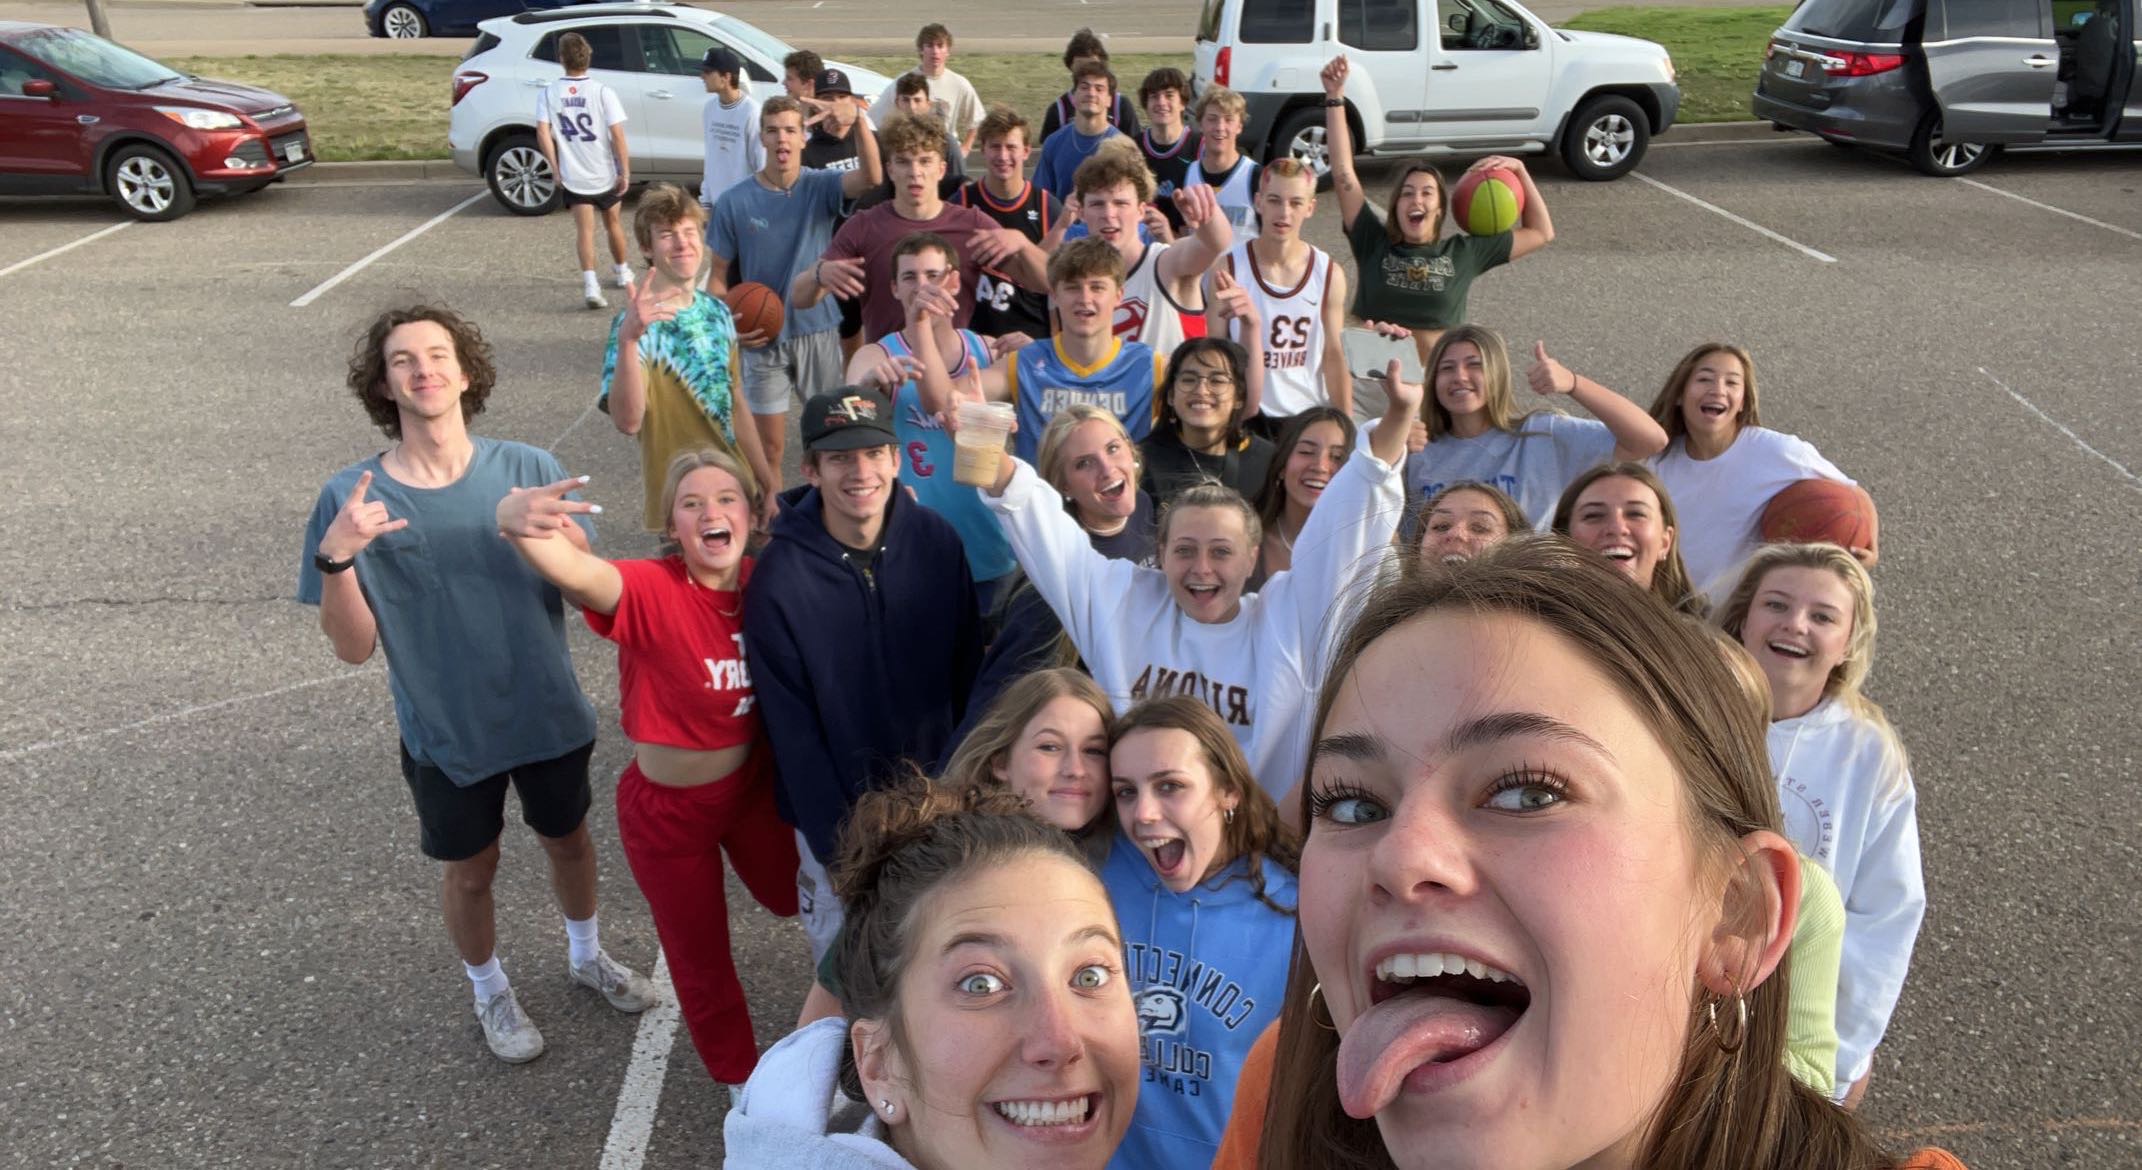 In the early summers of 2022, seniors filled into the parking lot for their senior prank and pose for a quick photo. They placed a basketball hoop in the middle of the parking lot and played a big game before school.